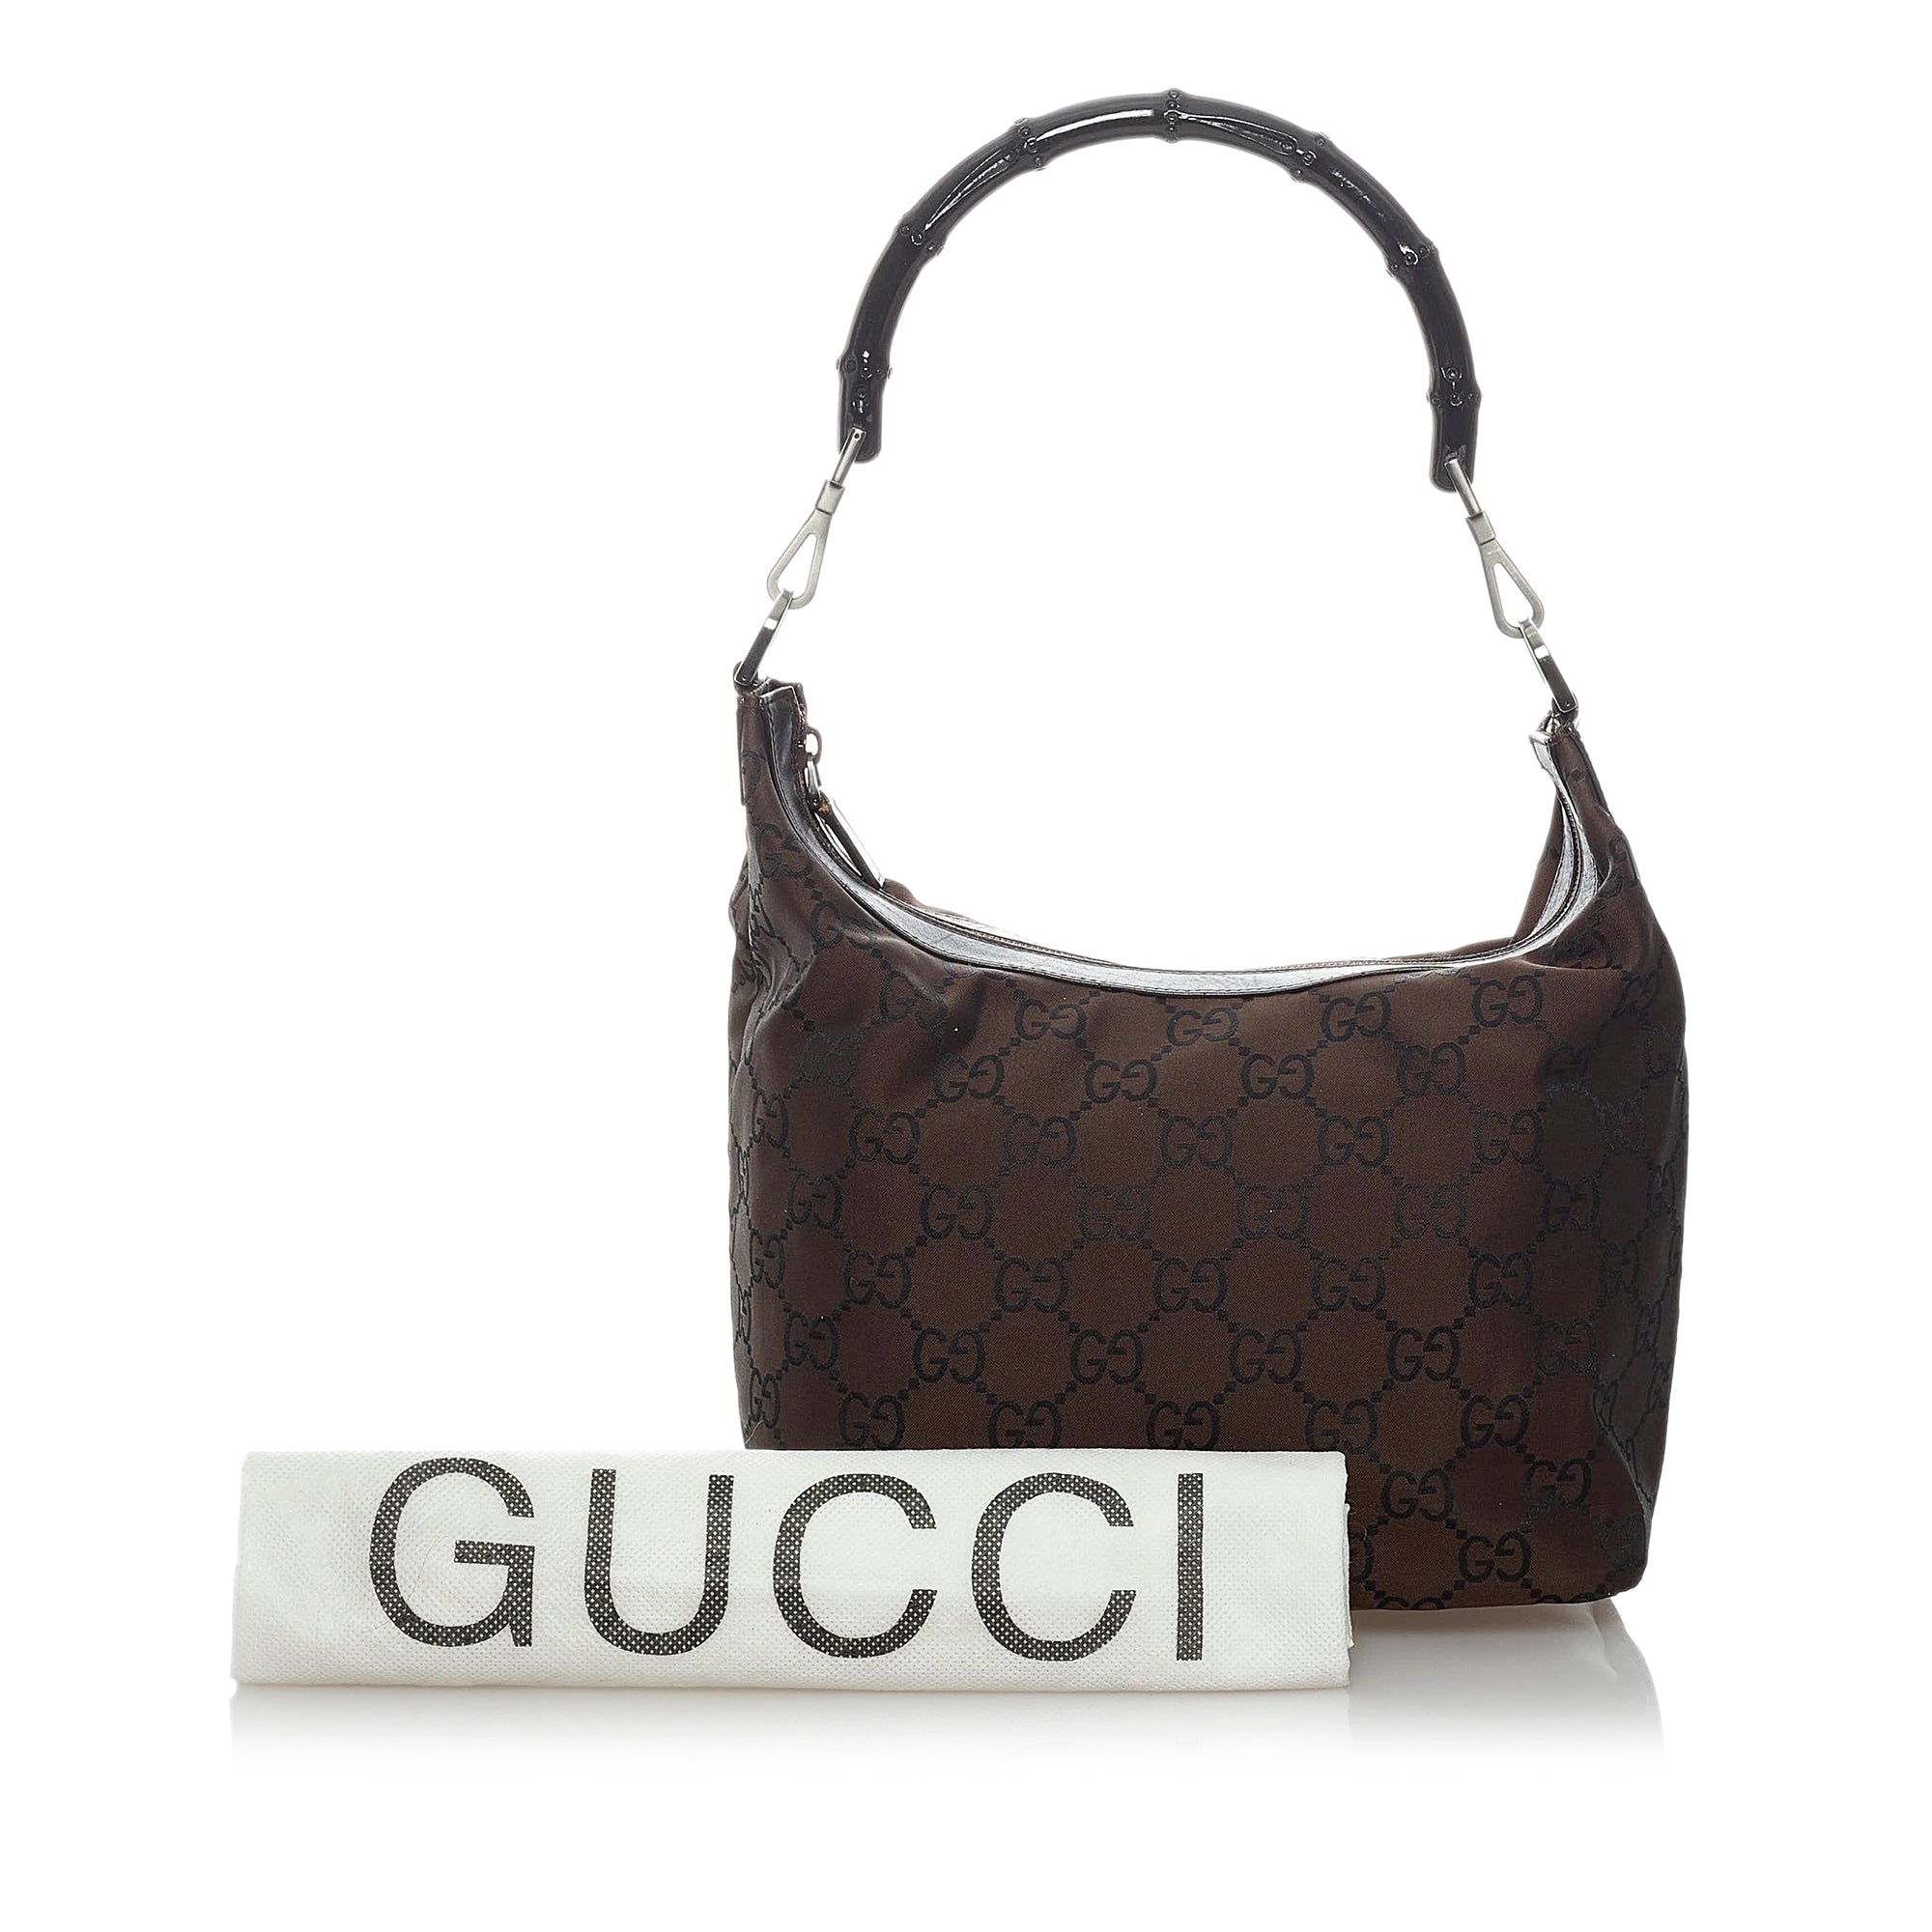 Gucci, Bags, Authentic Gucci Canvas And Leather Bamboo Hobo Bag